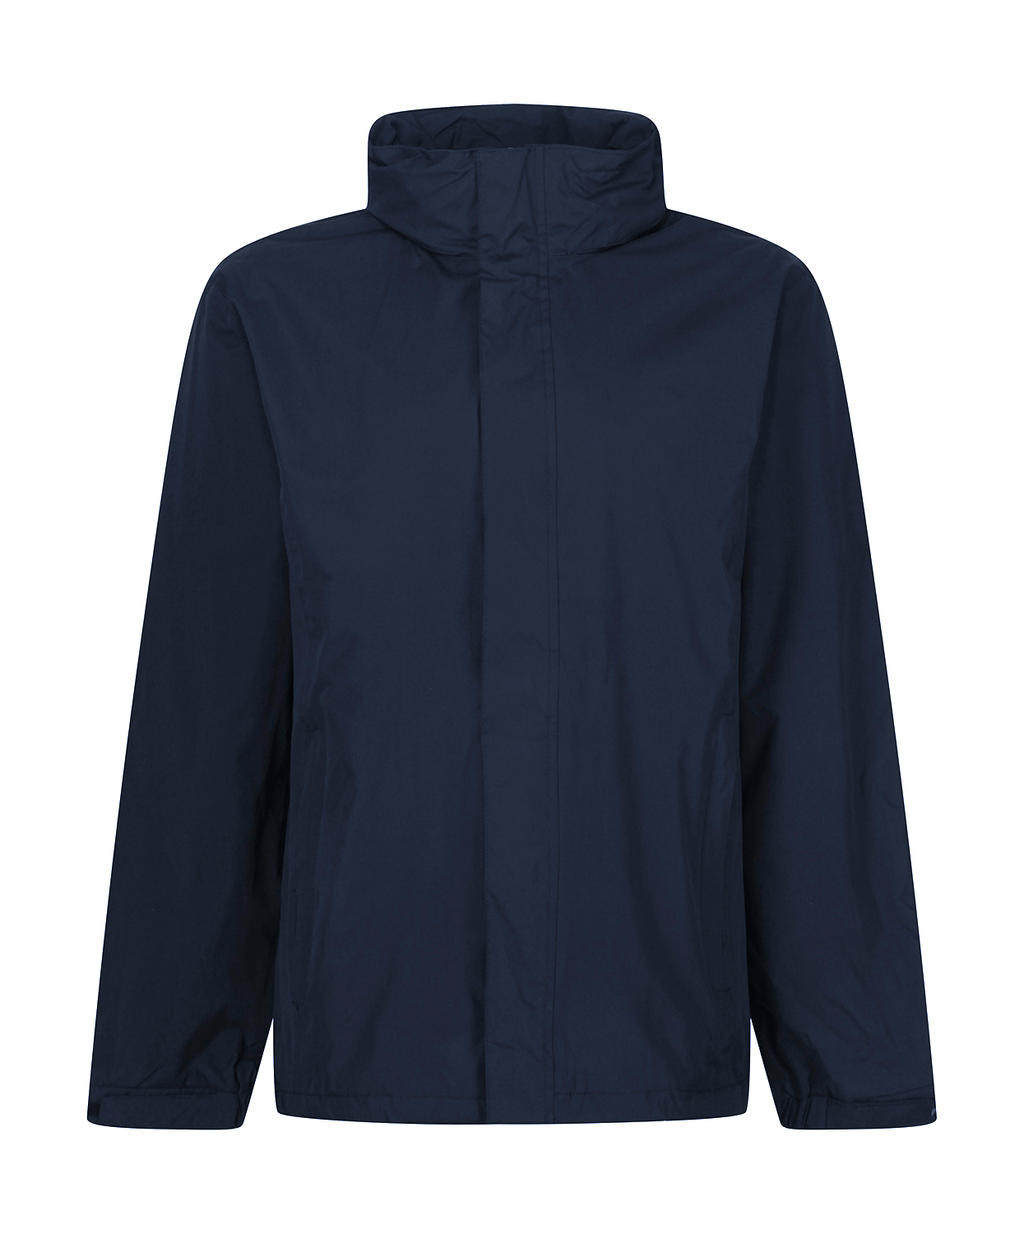  Ardmore Jacket in Farbe Navy